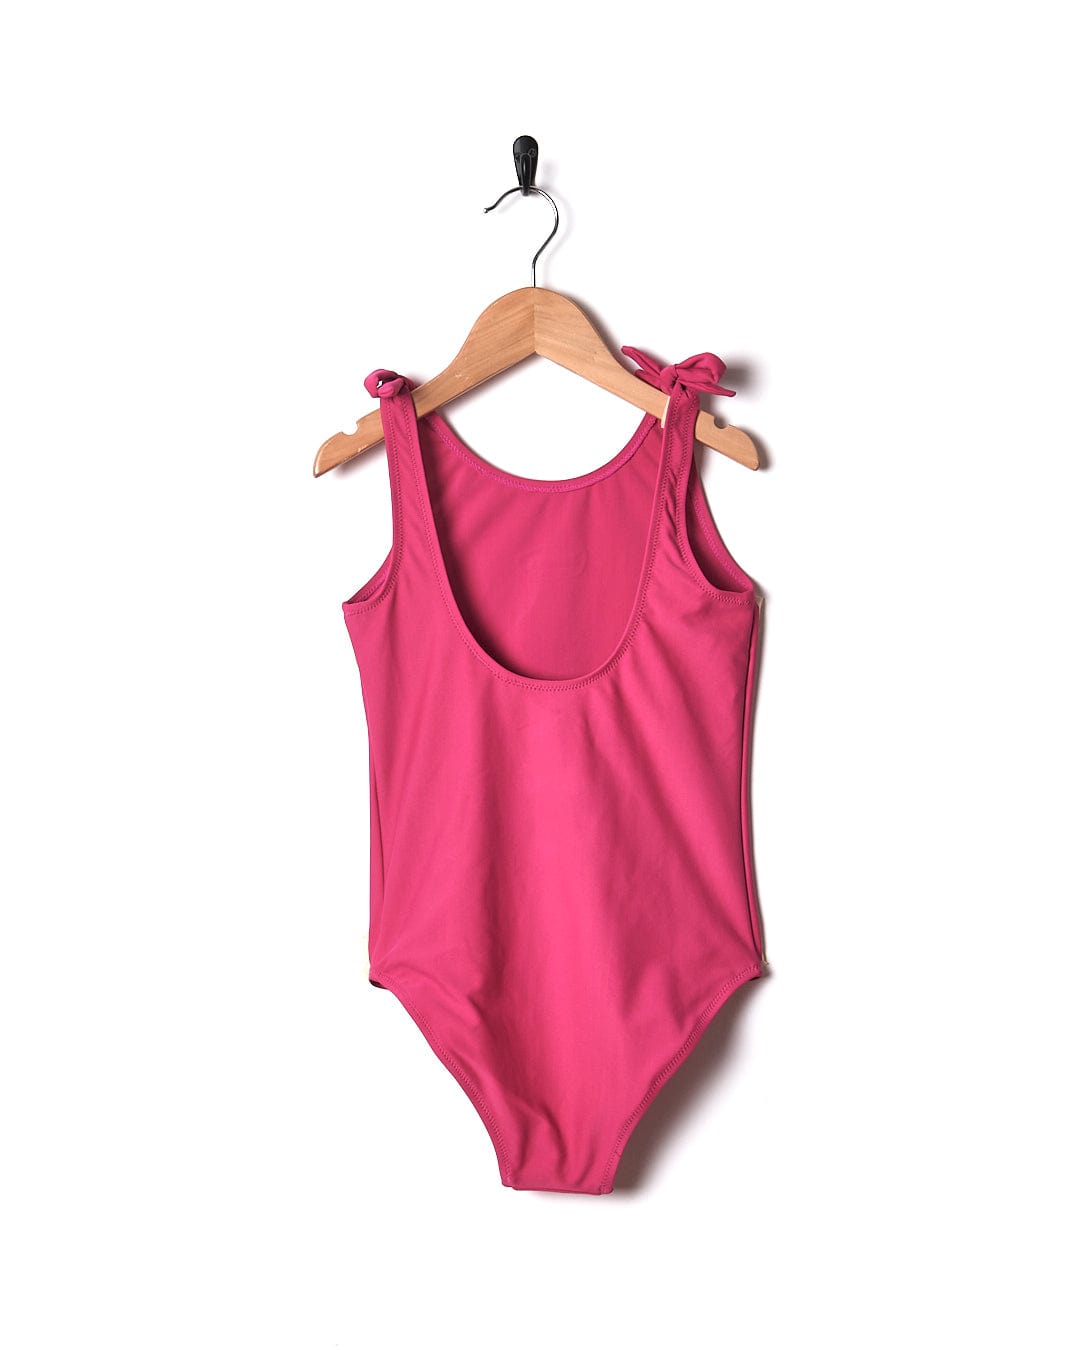 A Sunny Kids Swimsuit in Pink color hanging on a wooden hanger, by Saltrock.